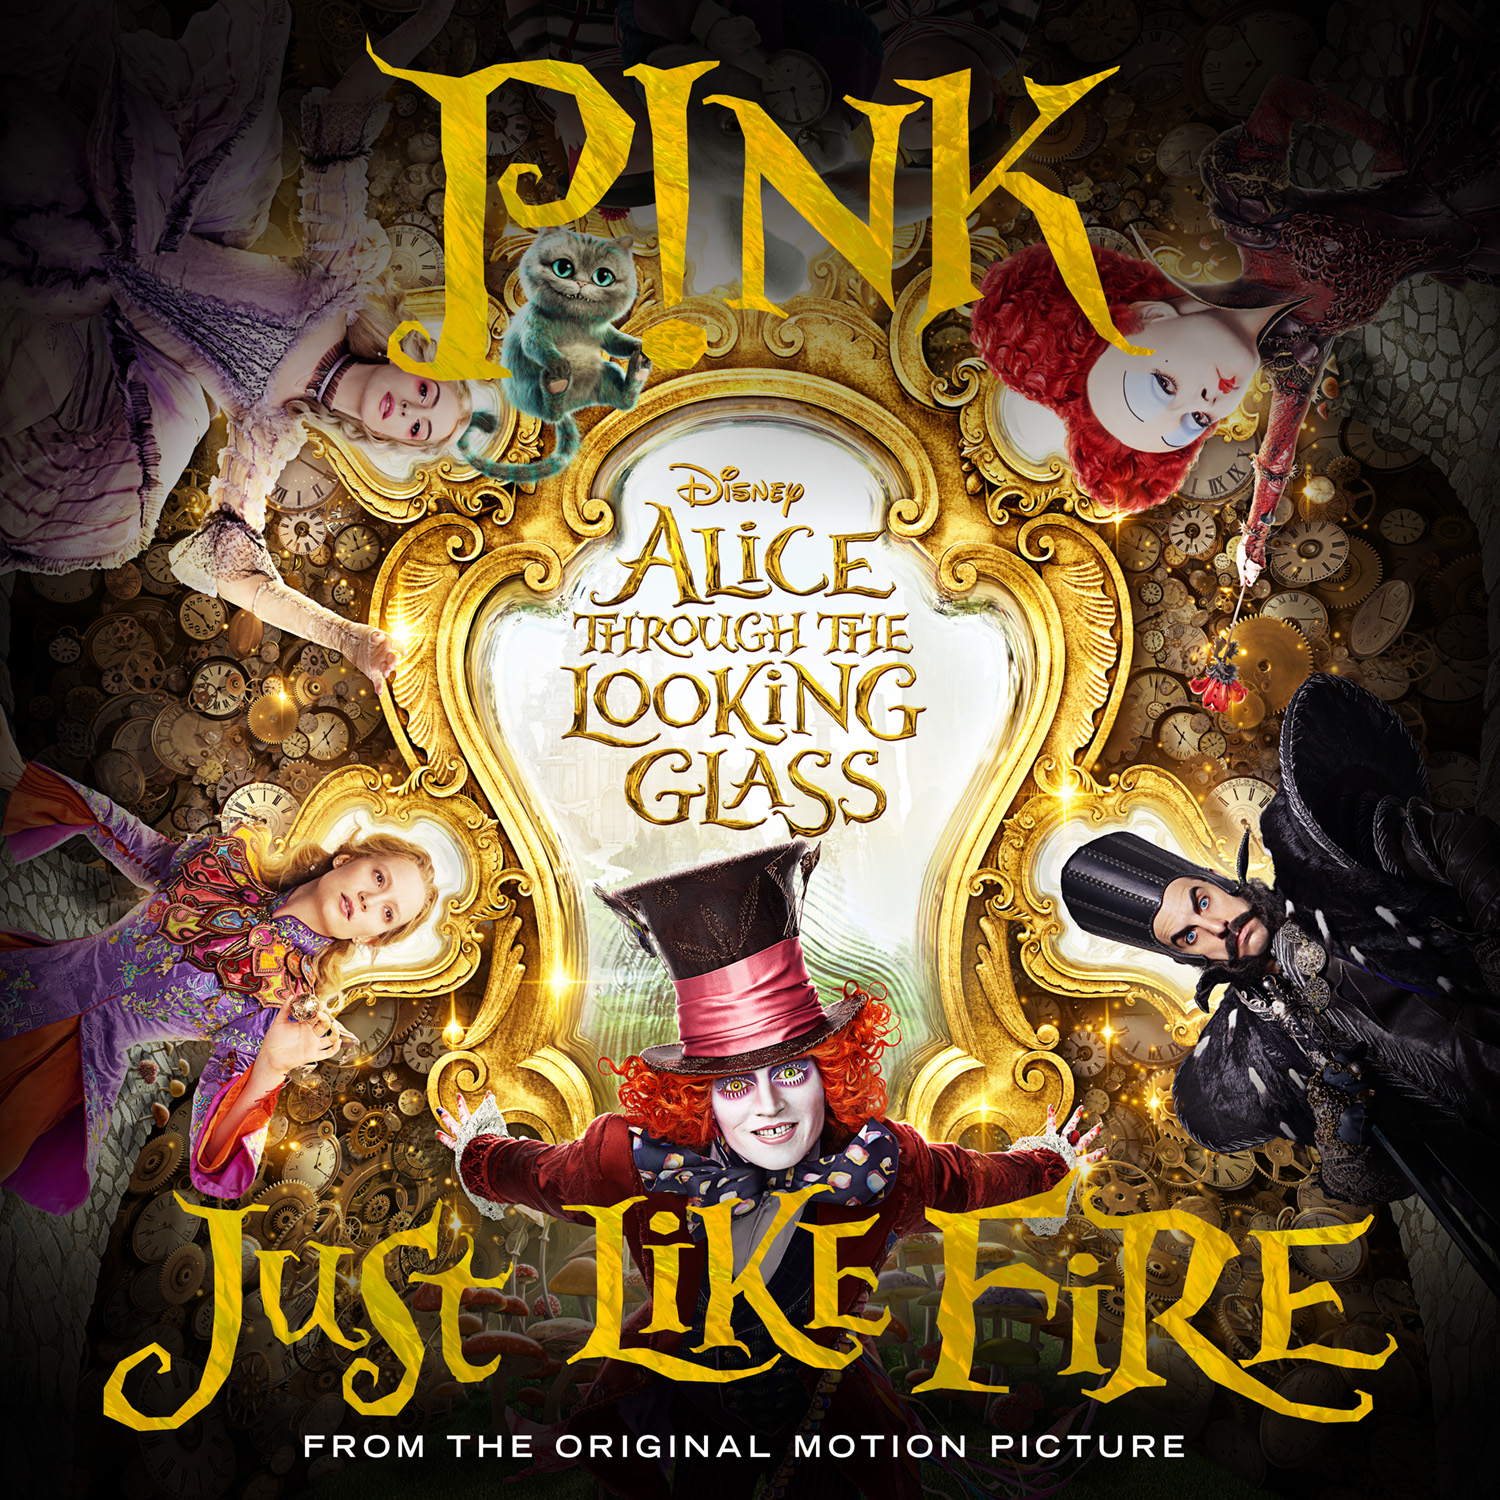 Artist P!NK Writes Original Song for Disney’s ‘Alice Through the Looking Glass’